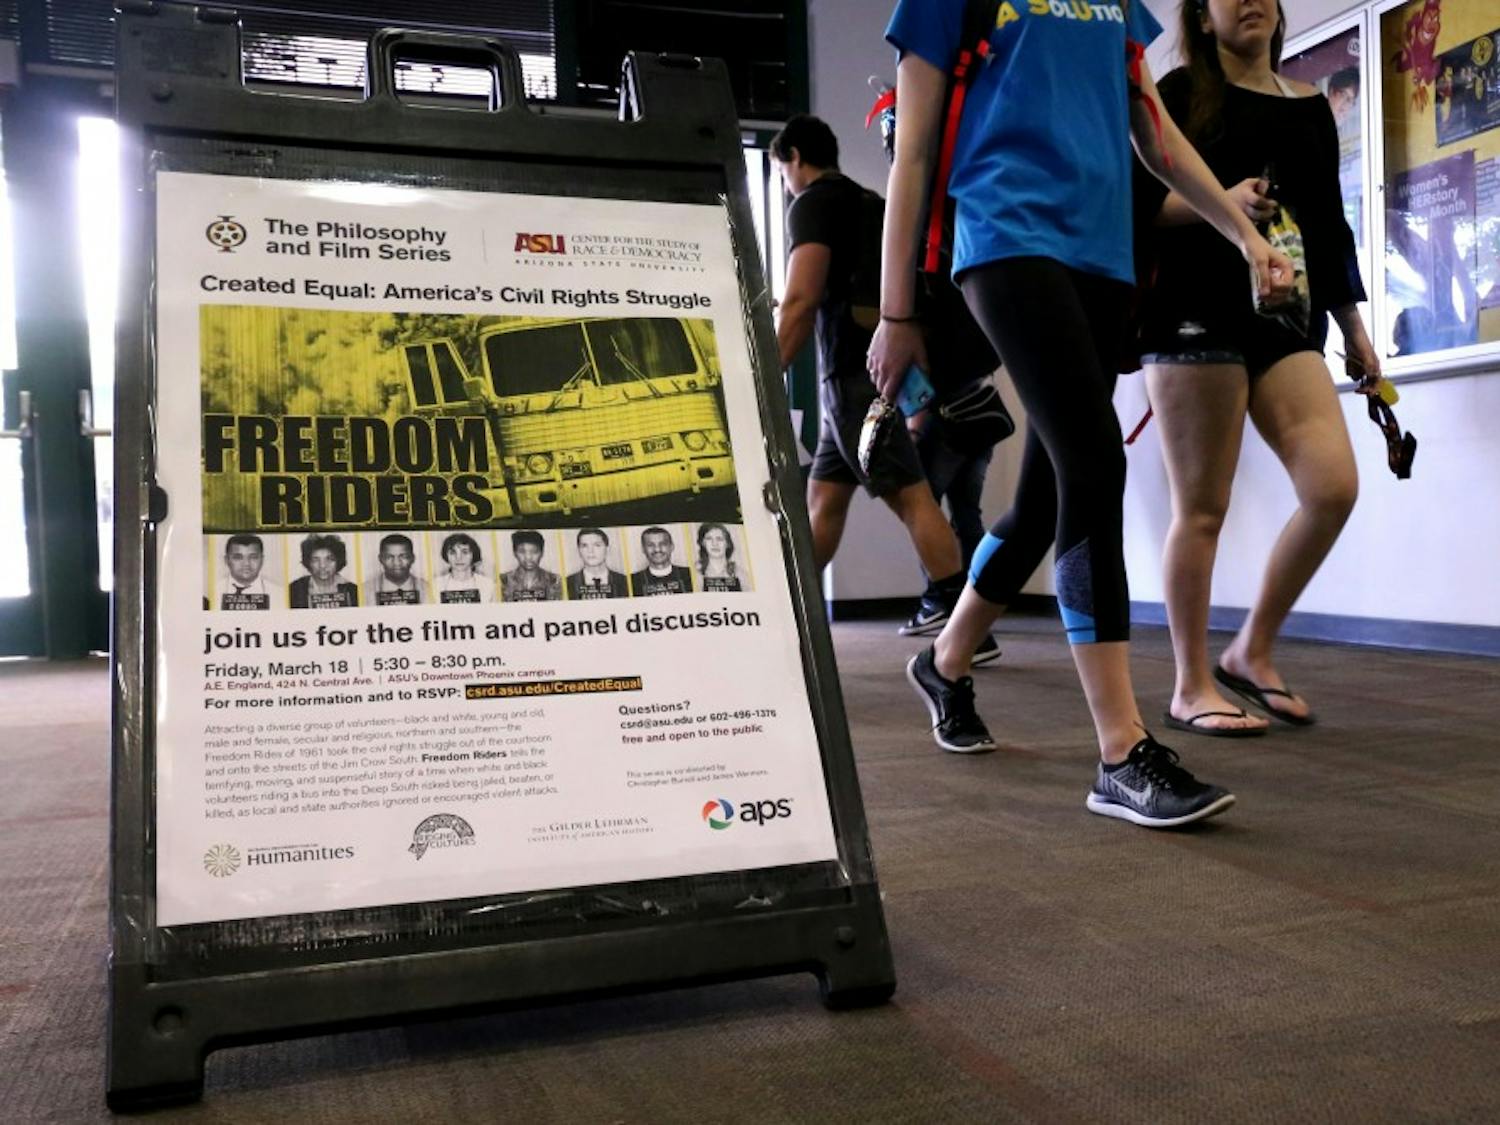 Students walk past a sign on Wednesday, March 16, 2016, in the University Center building advertising 'Freedom Riders' as the next film in the series of Created Equal: America's Civil Rights Struggle.